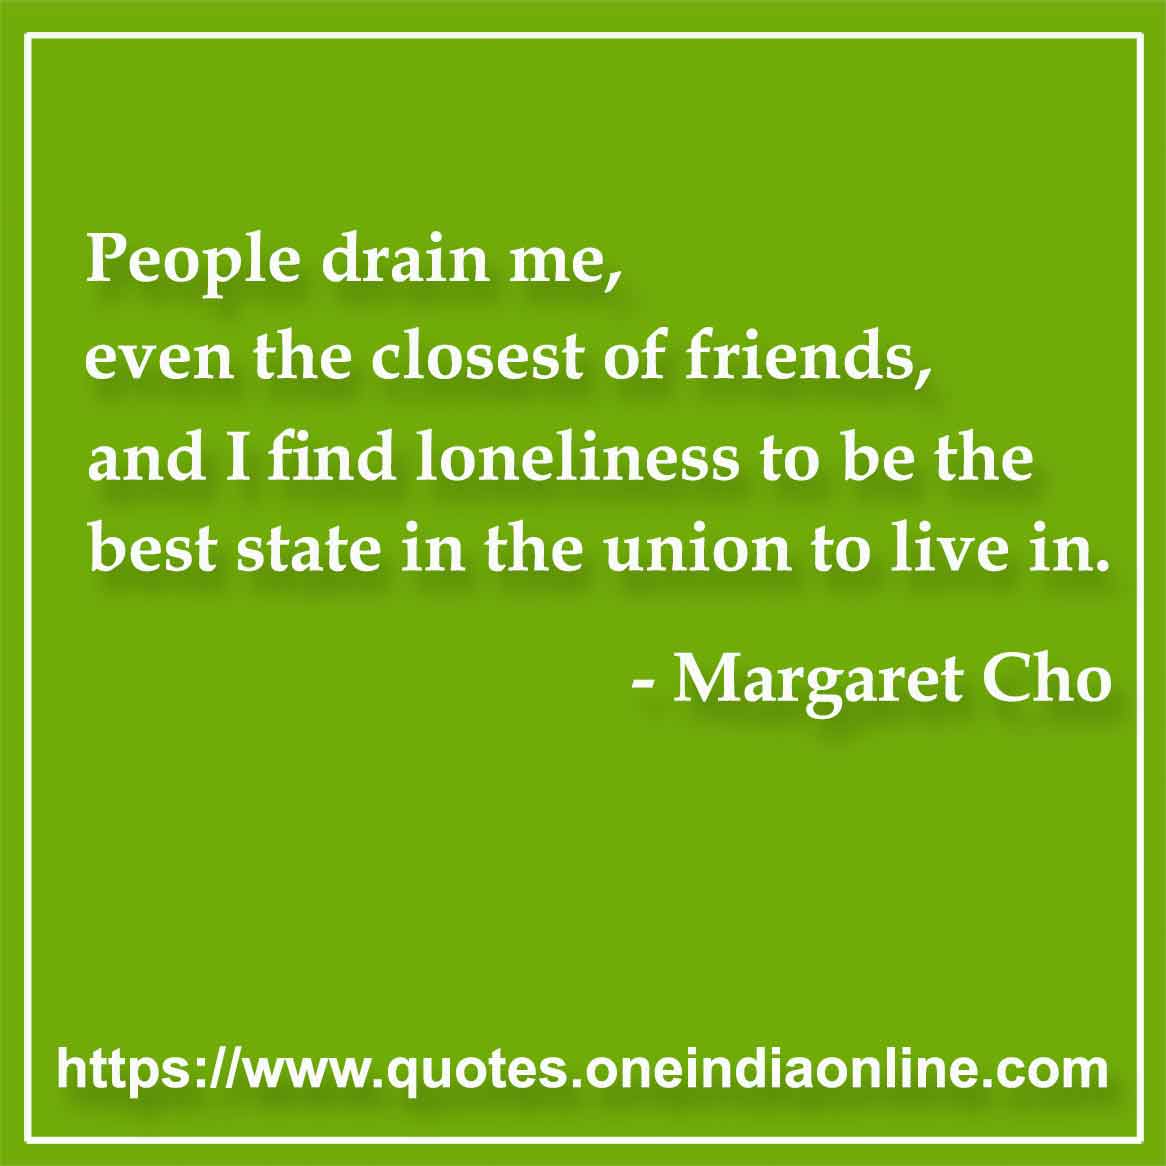 People drain me, even the closest of friends, and I find loneliness to be the best state in the union to live in.

- Loneliness Quotes by Margaret Cho 